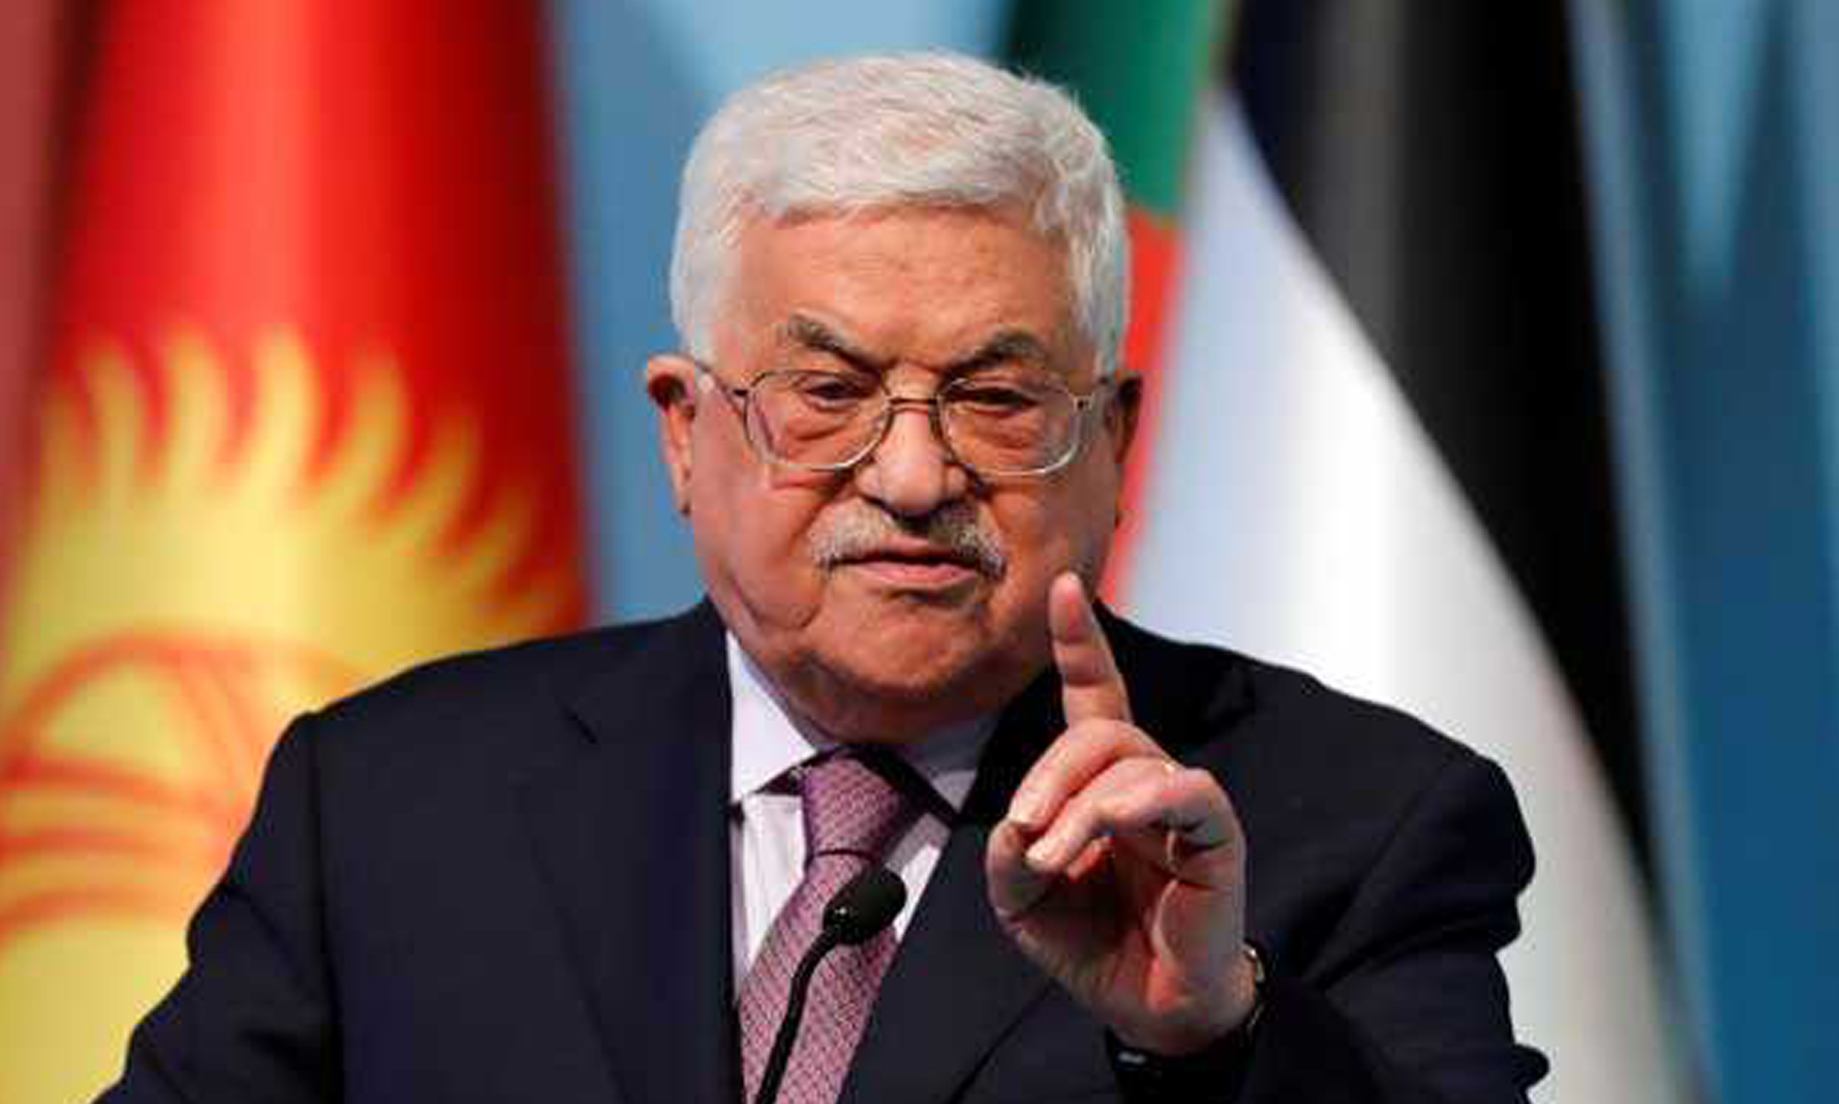 Palestinian Government Calls For International Protection For Palestinians